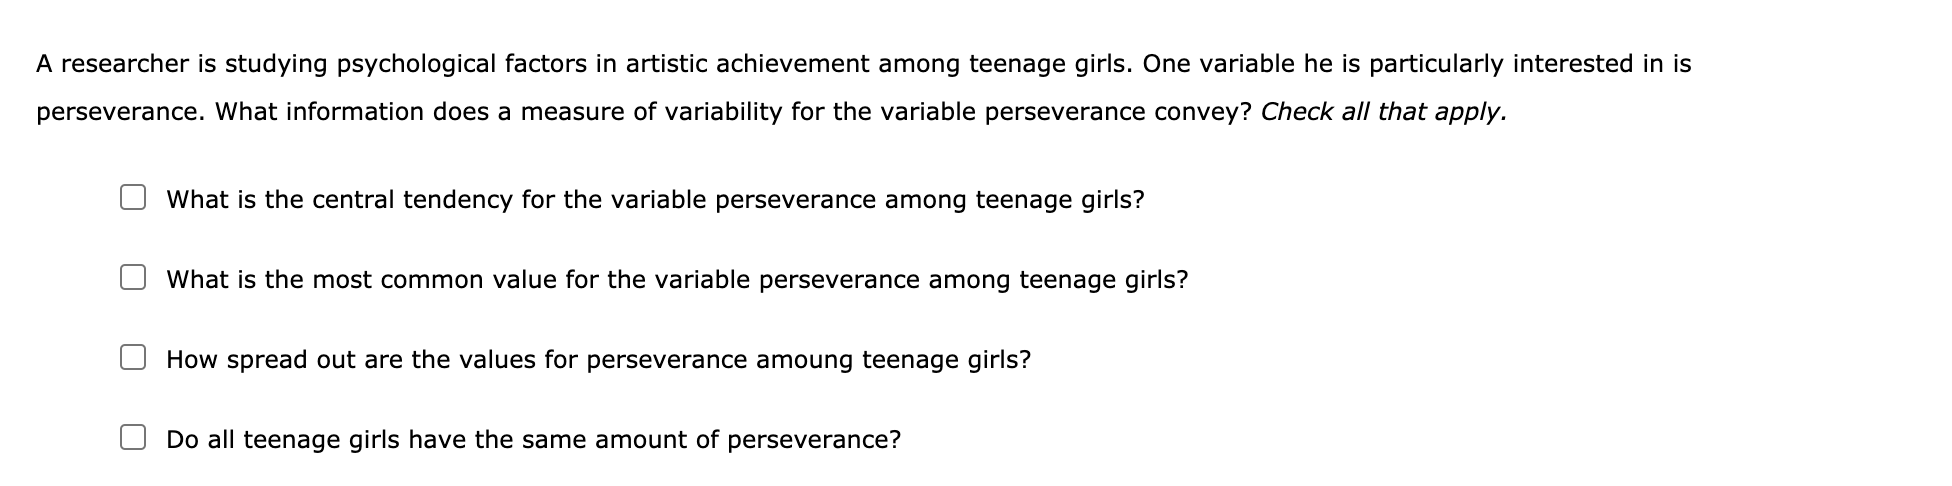 A researcher is studying psychological factors in artistic achievement among teenage girls. One variable he is particularly interested in is
perseverance. What information does a measure of variability for the variable perseverance convey? Check all that apply.
What is the central tendency for the variable perseverance among teenage girls?
What is the most common value for the variable perseverance among teenage girls?
How spread out are the values for perseverance amoung teenage girls?
Do all teenage girls have the same amount of perseverance?
